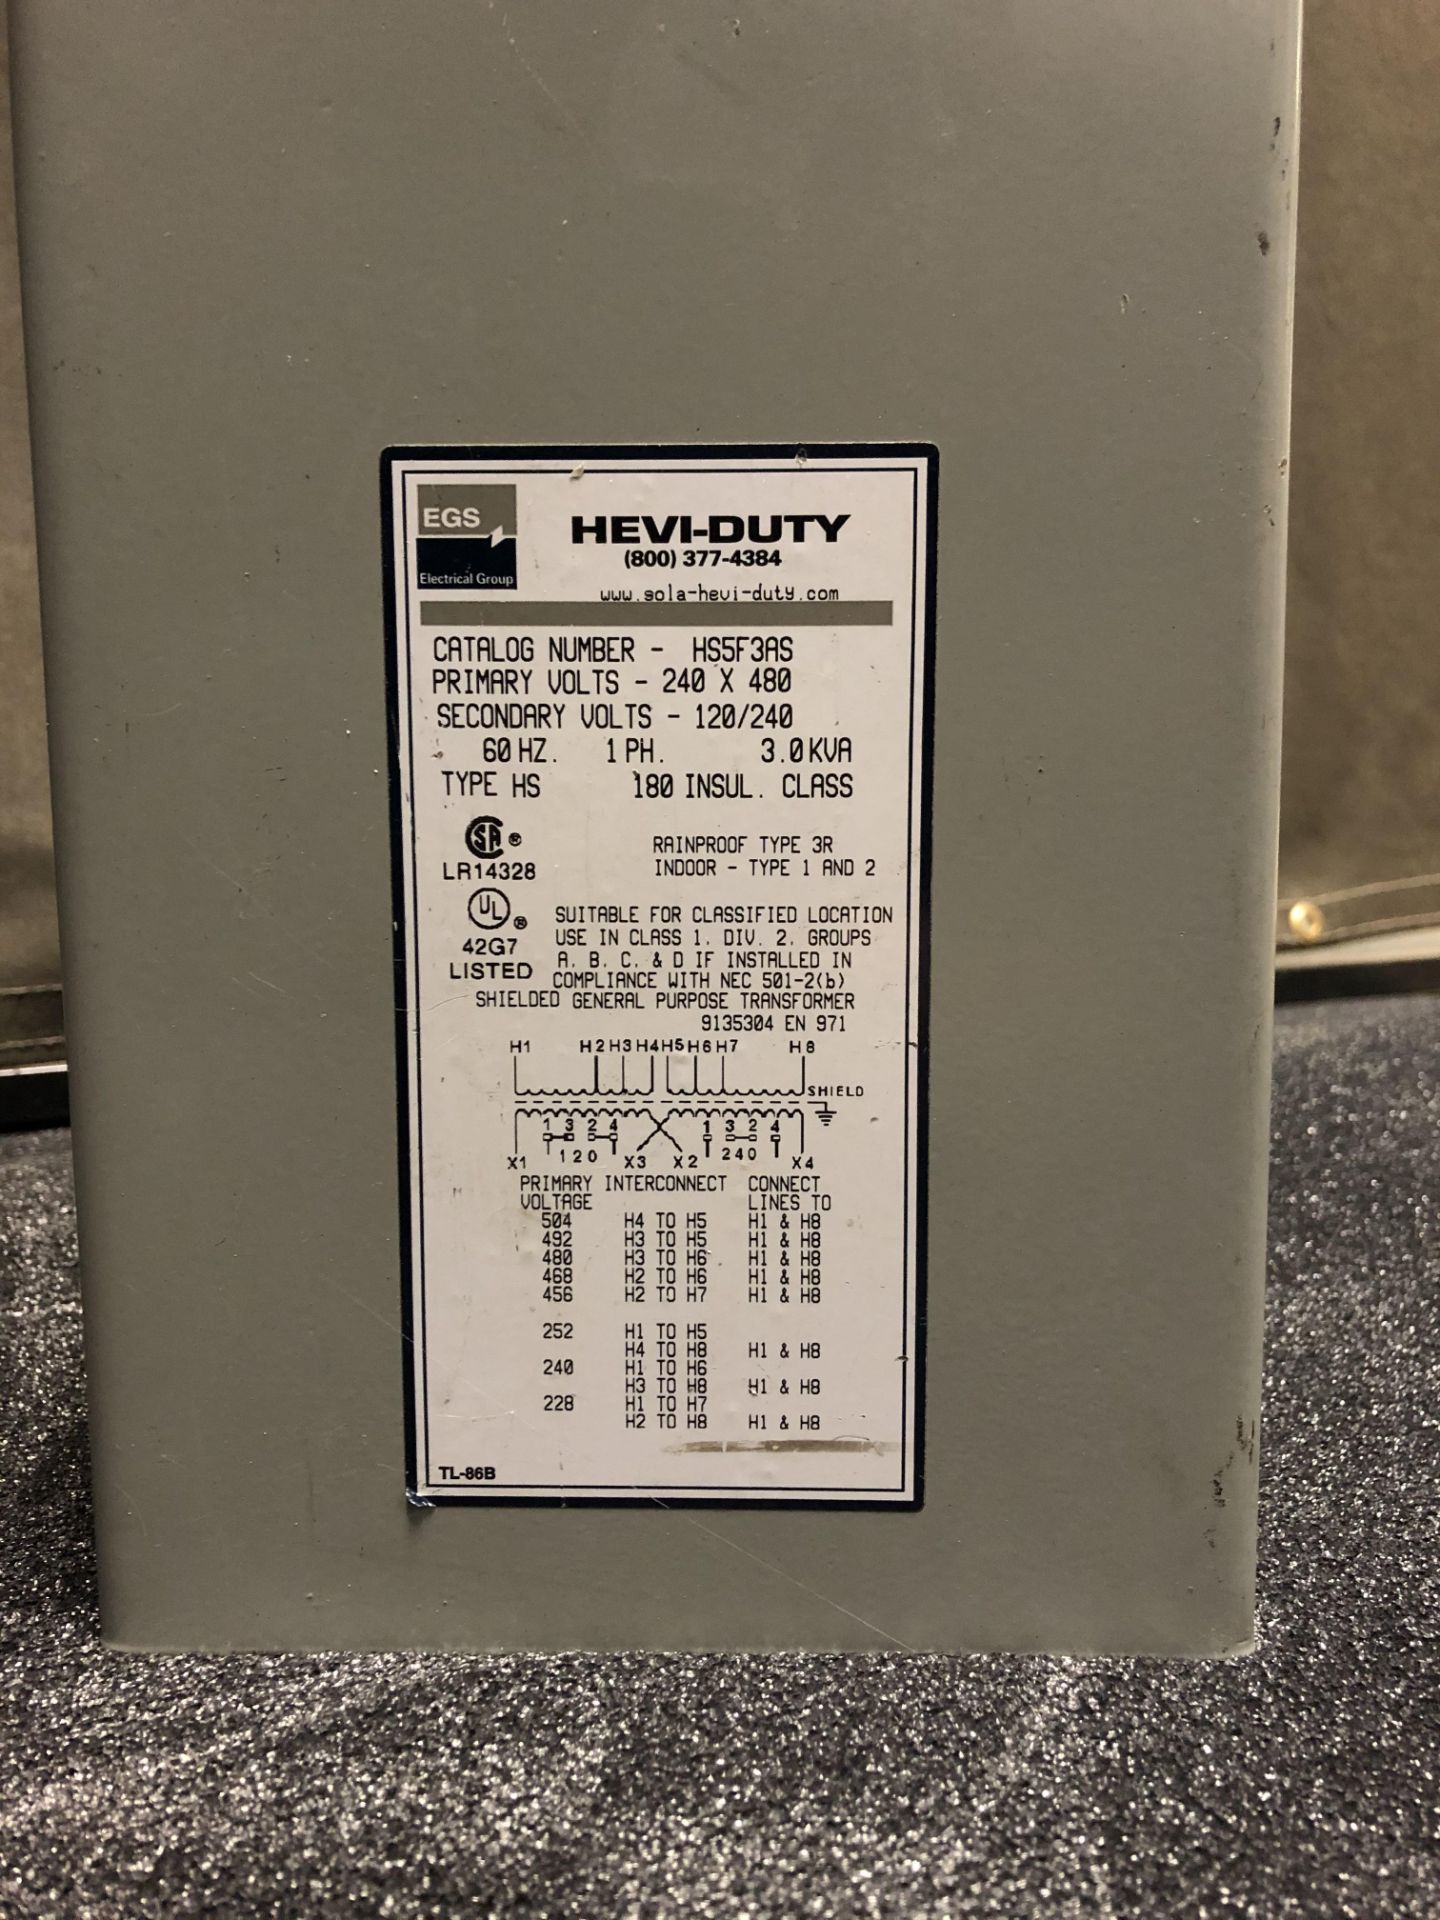 LOT OF 3 - EMERSON/EGS HEVI-DUTY HS14F3BS TRANSFORMER 3KVA 190/200x380/440V-IN, 110/220V-OUT 50/60HZ - Image 5 of 9